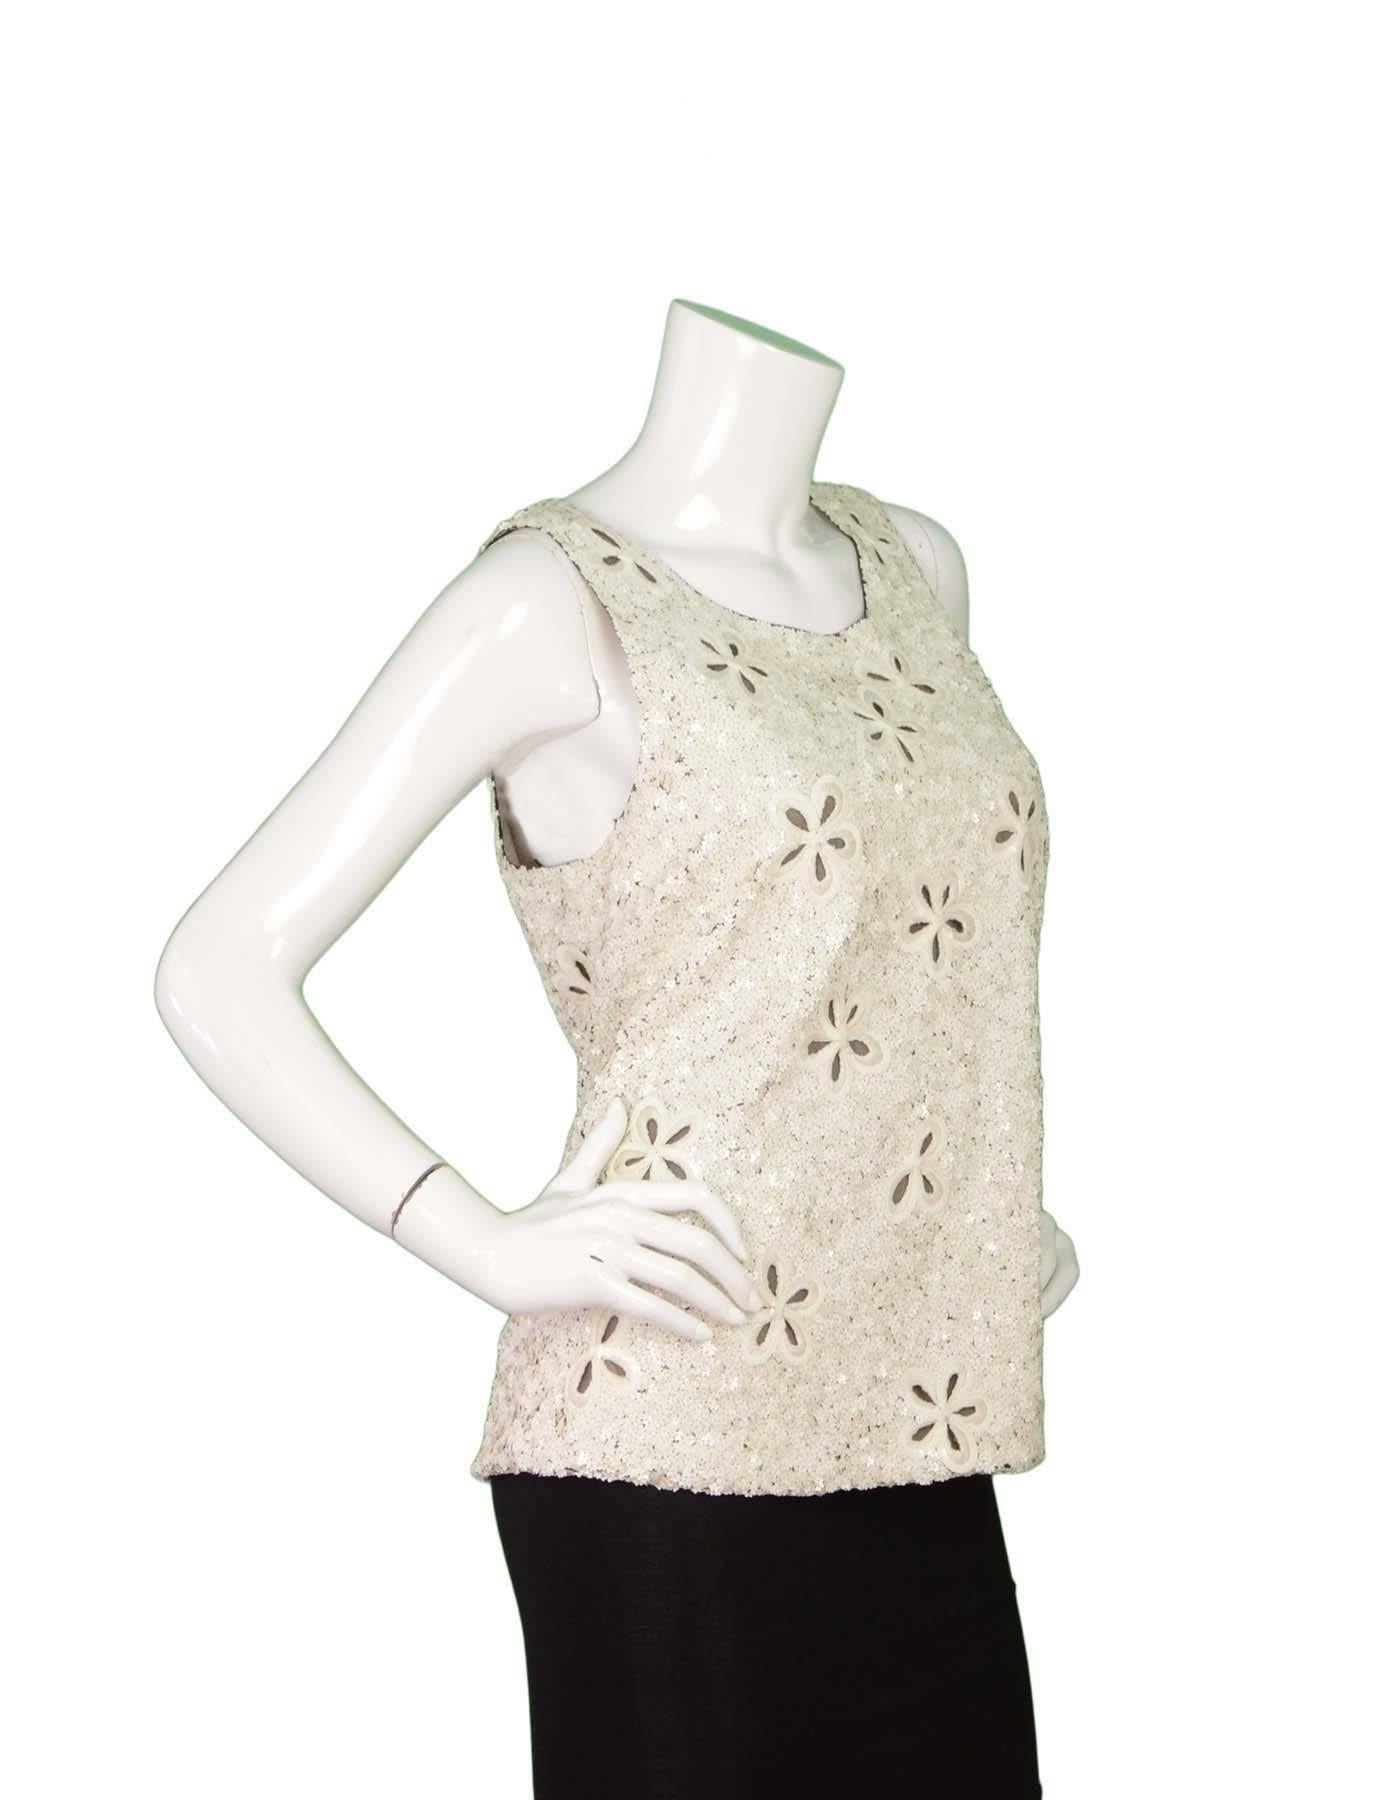 Chanel Floral Sequin Sleeveless Top 
Features flower cut outs with black mesh underlay
Made In: France
Year of Production: 2011
Color: Ivory and black
Composition: 100% silk
Lining: Nude, 100% silk
Closure/Opening: Back center zip up with